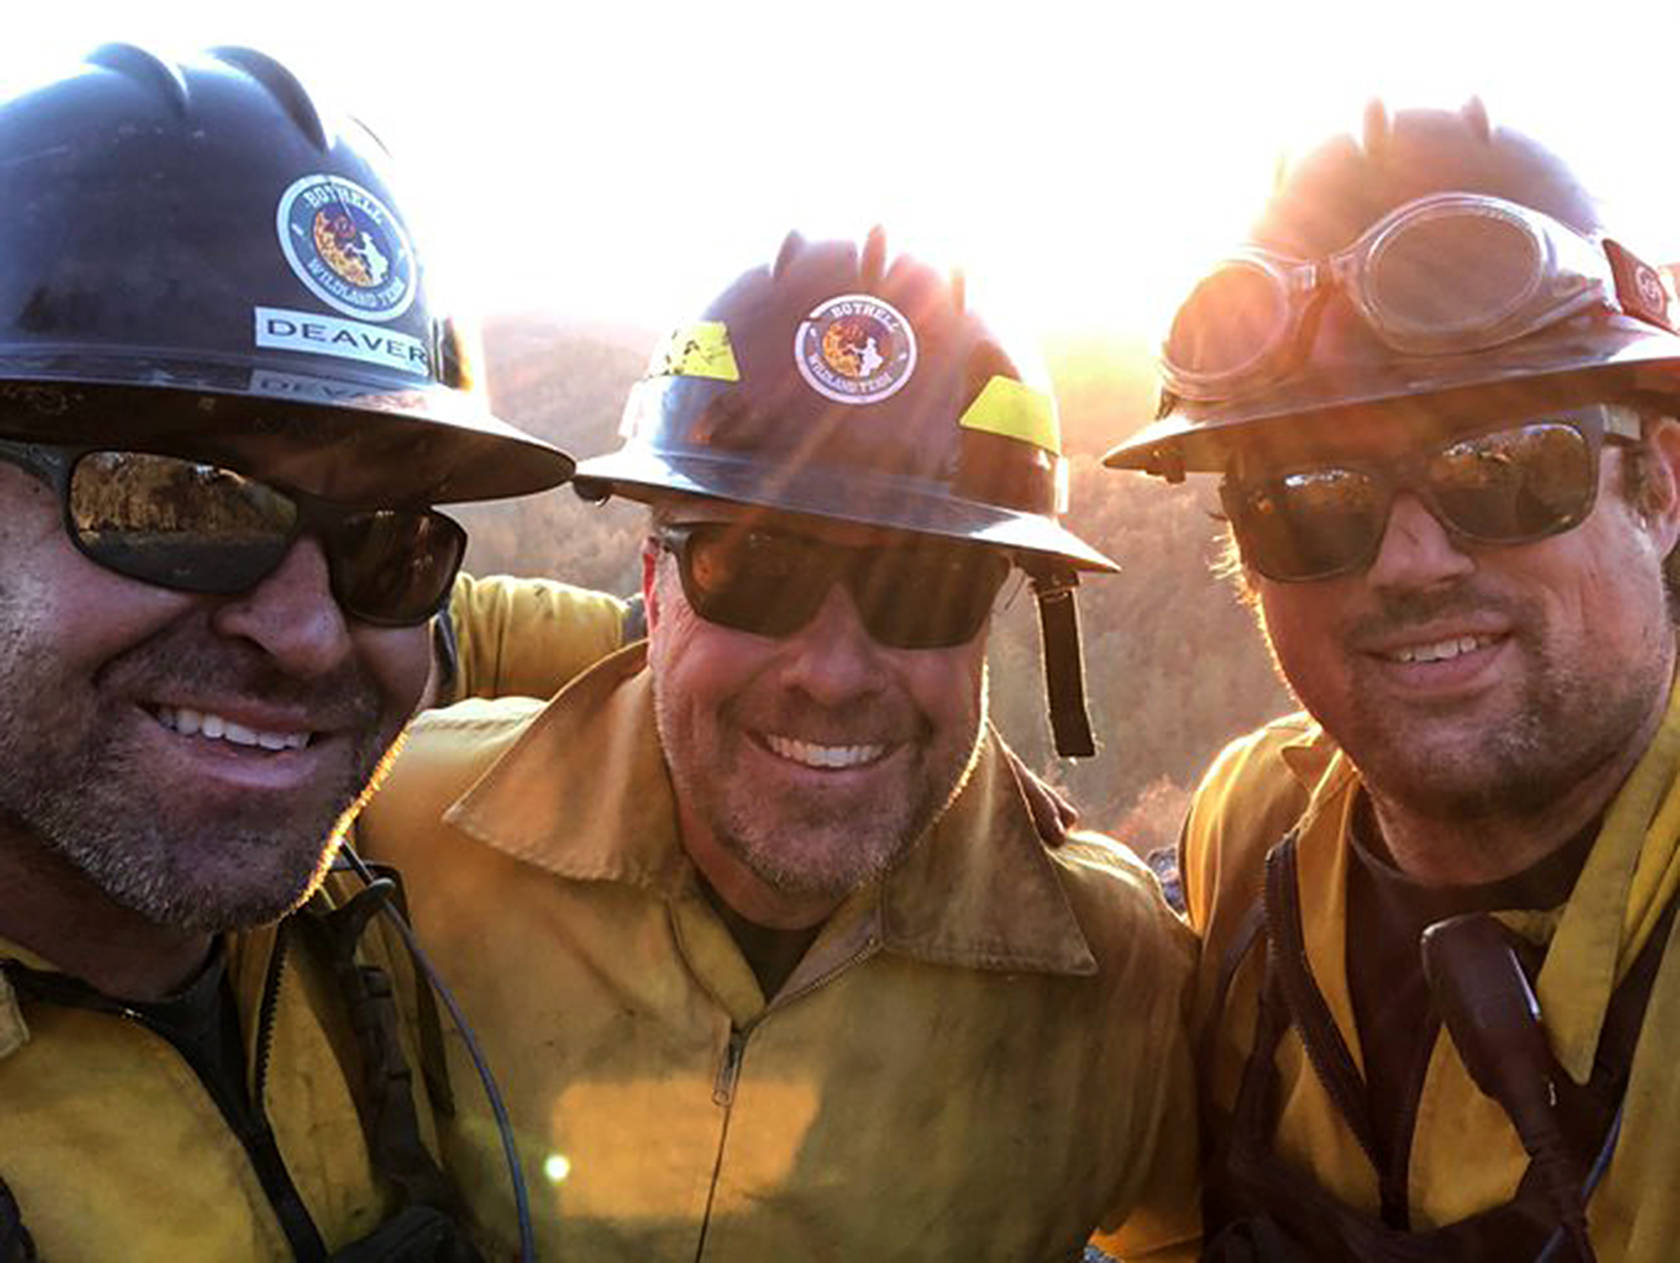 John Deaver, Hugh Moag and Cody Barwell of the Bothell Fire Department. The three were mobilized to help defeat California fires. They returned on Nov. 5. Photo courtesy of Bothell Fire Department